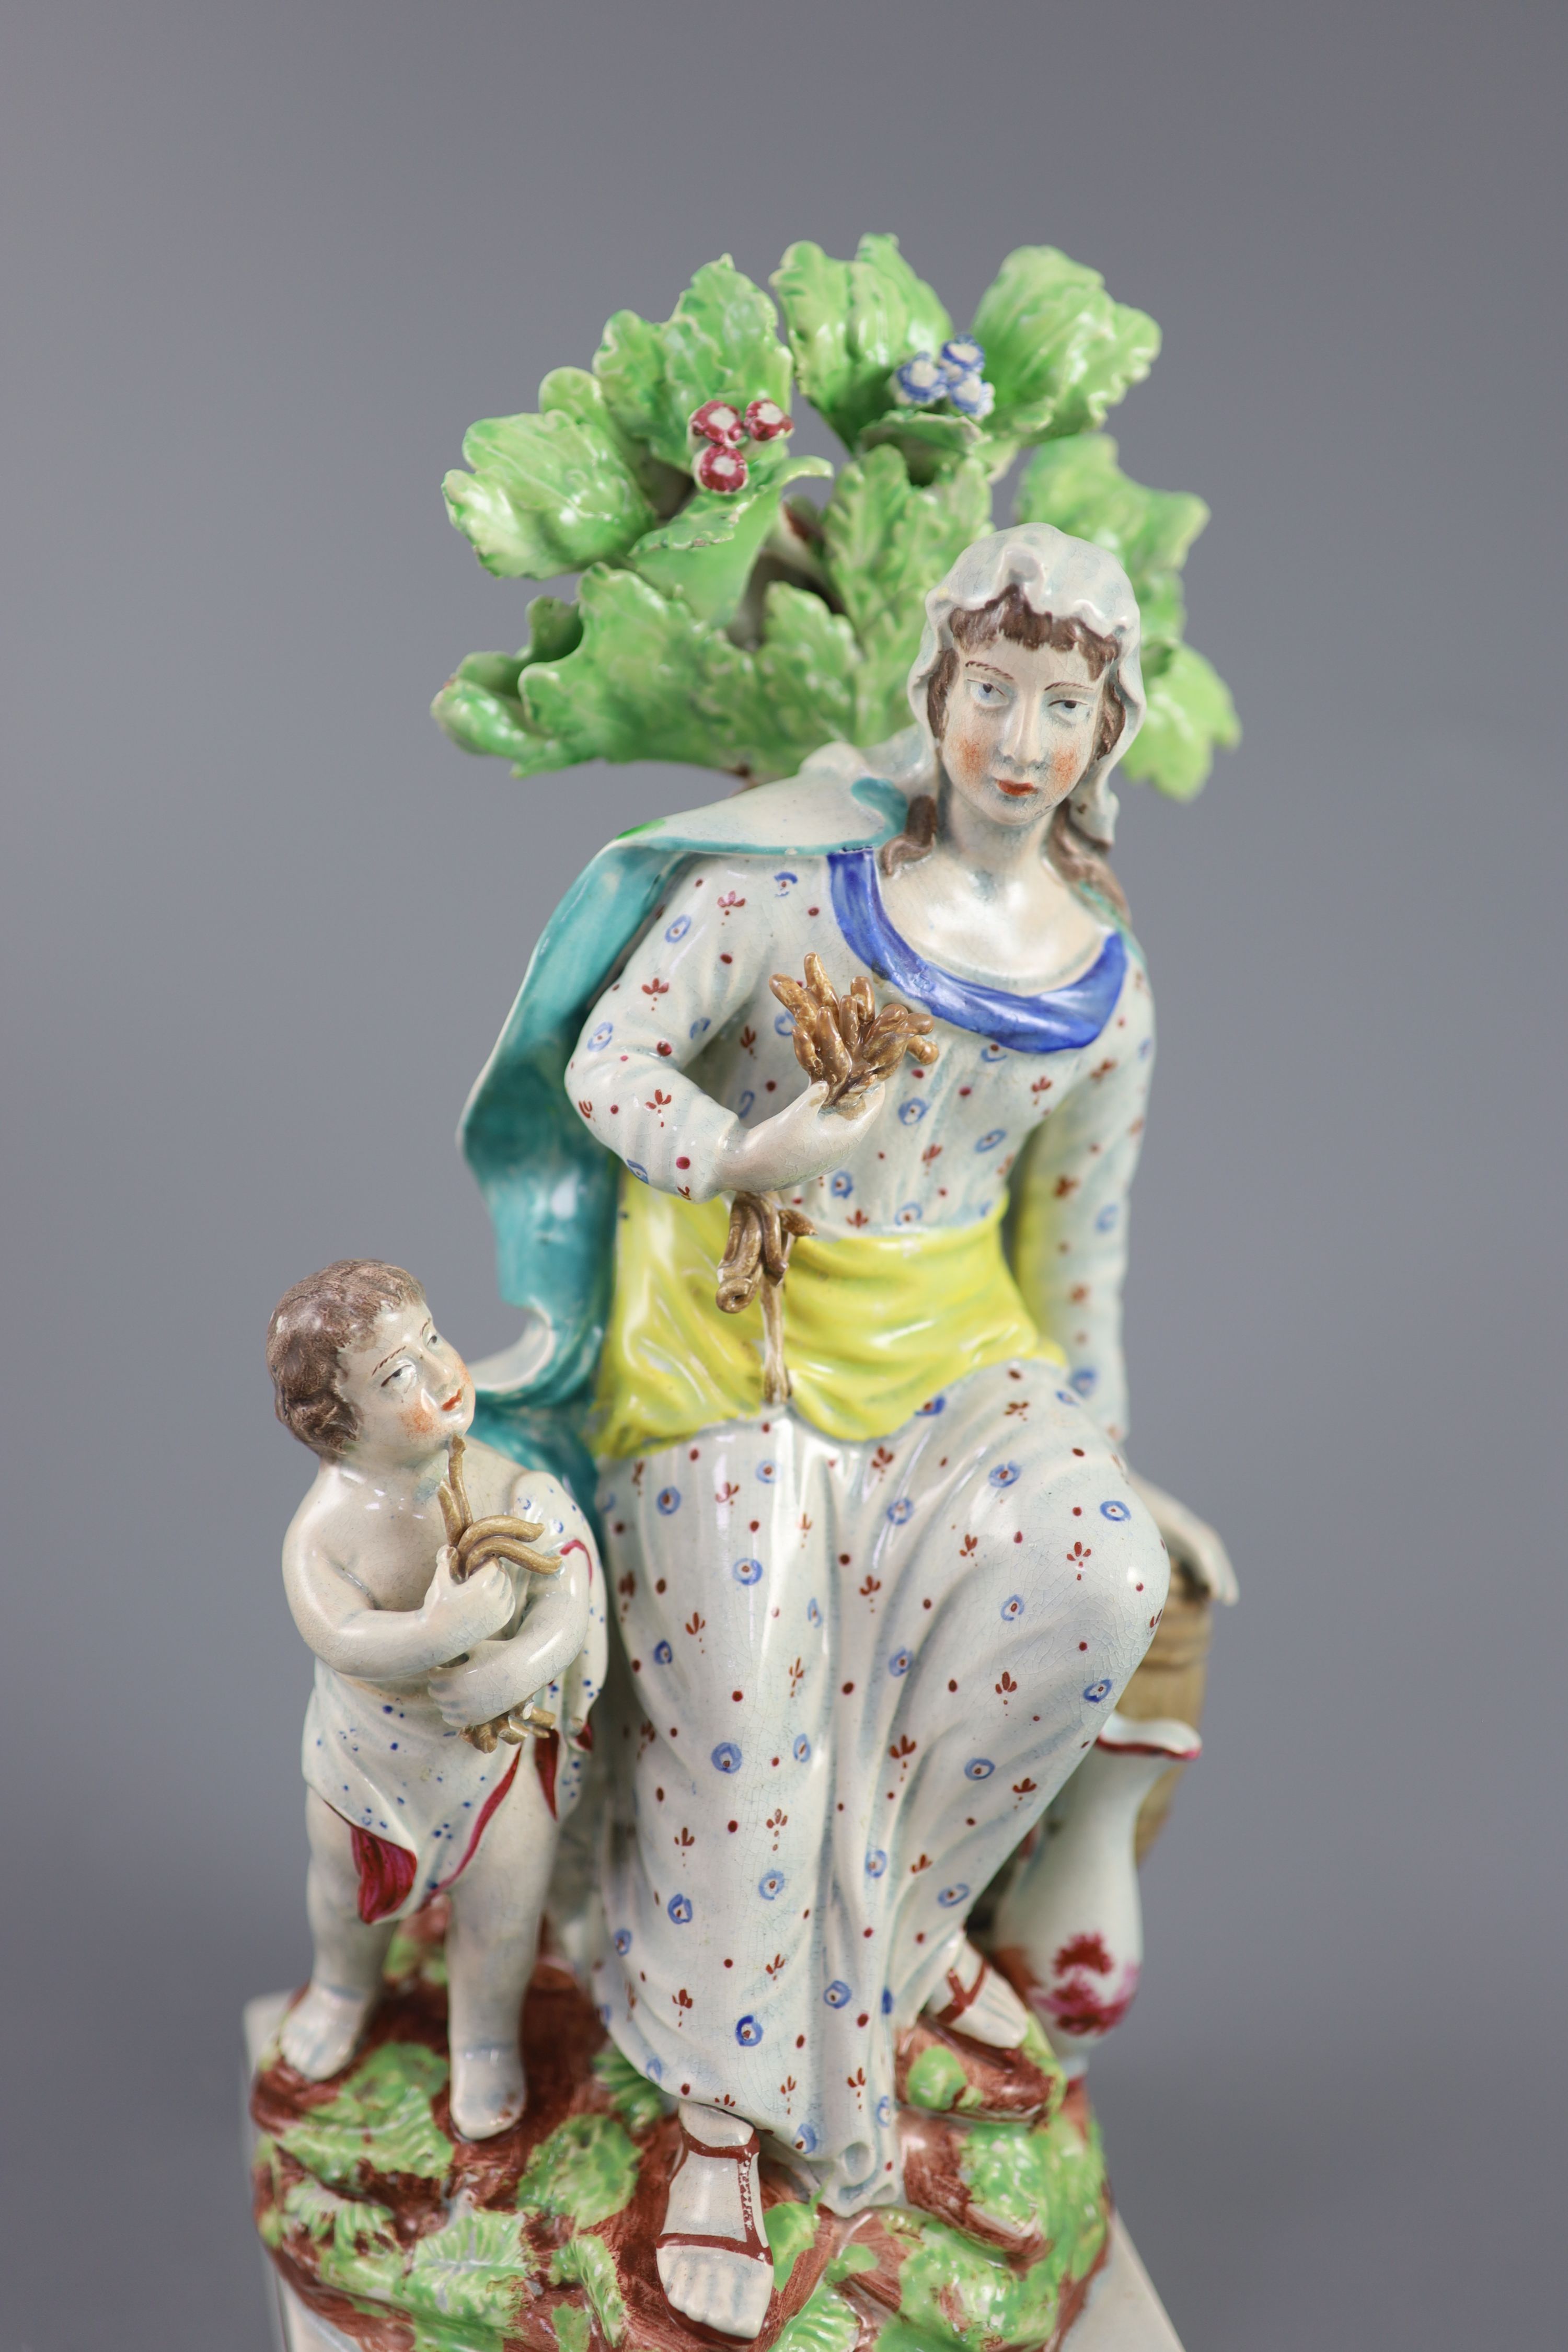 A Ralph Wood type group of a widow of Zarepeth with oil and barrel, c.1790-1810, 27.5cm high